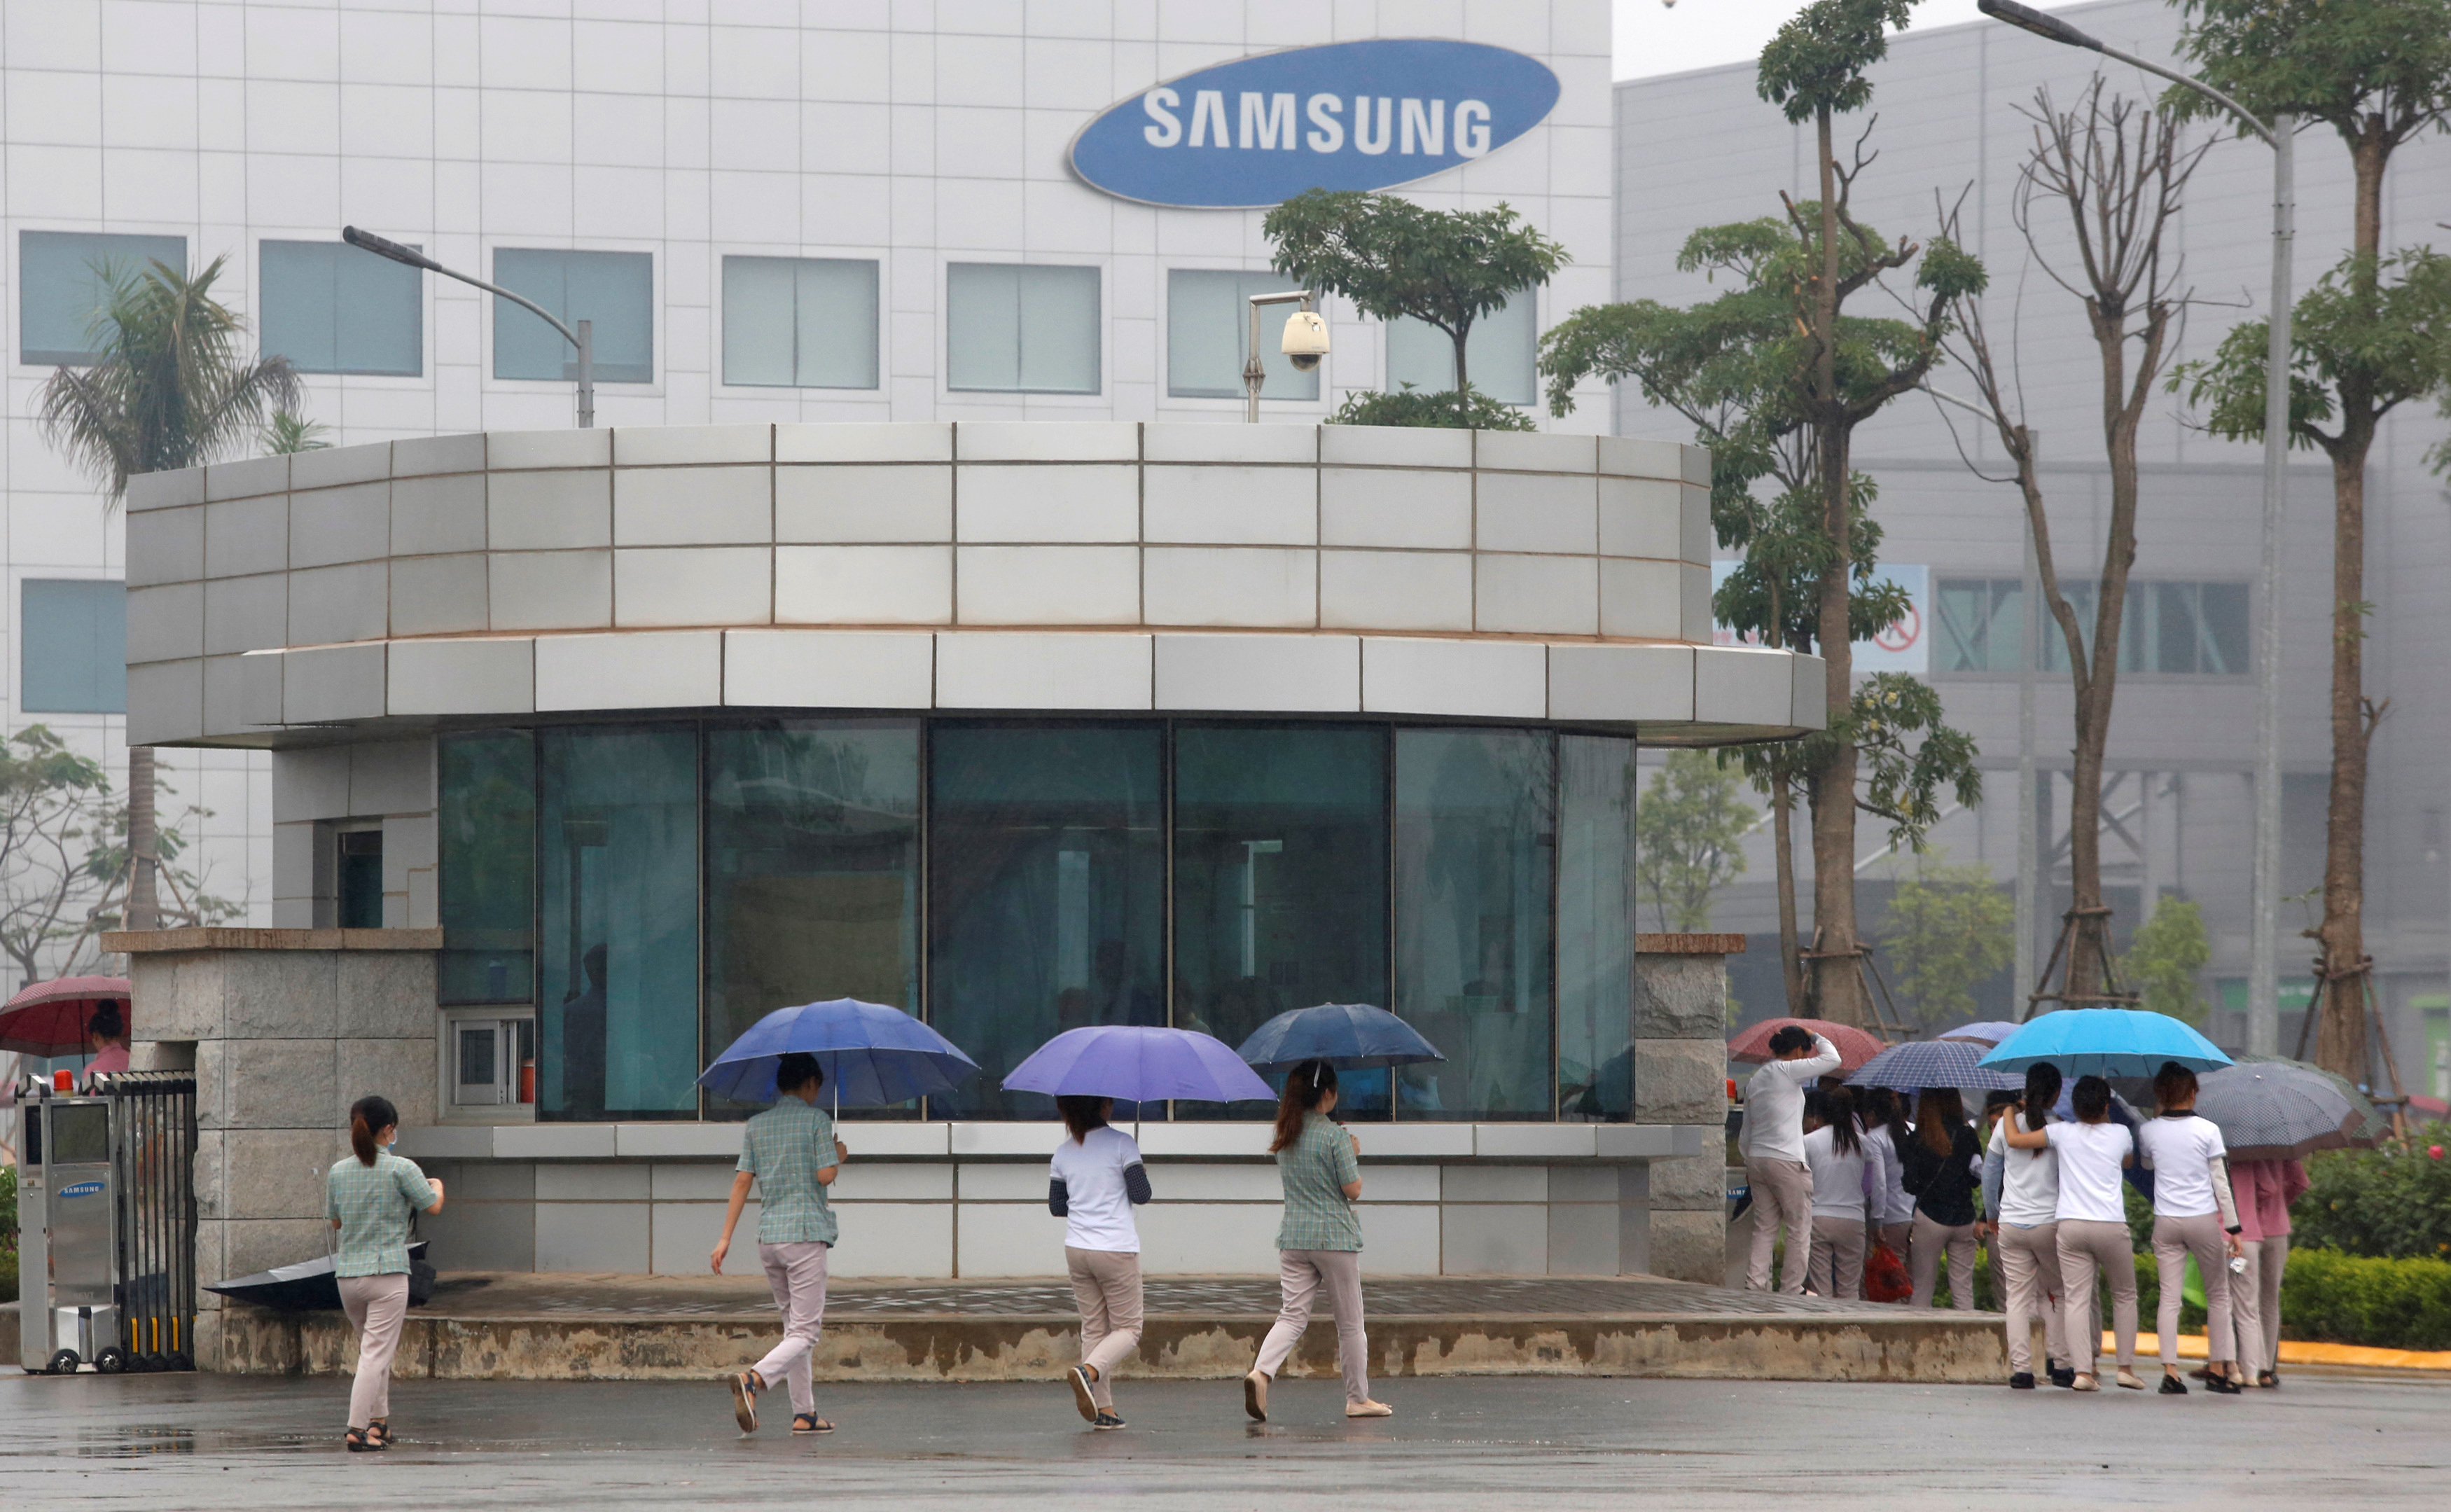 Employees make their way to work at a Samsung factory in Thai Nguyen County, north of Hanoi, Vietnam